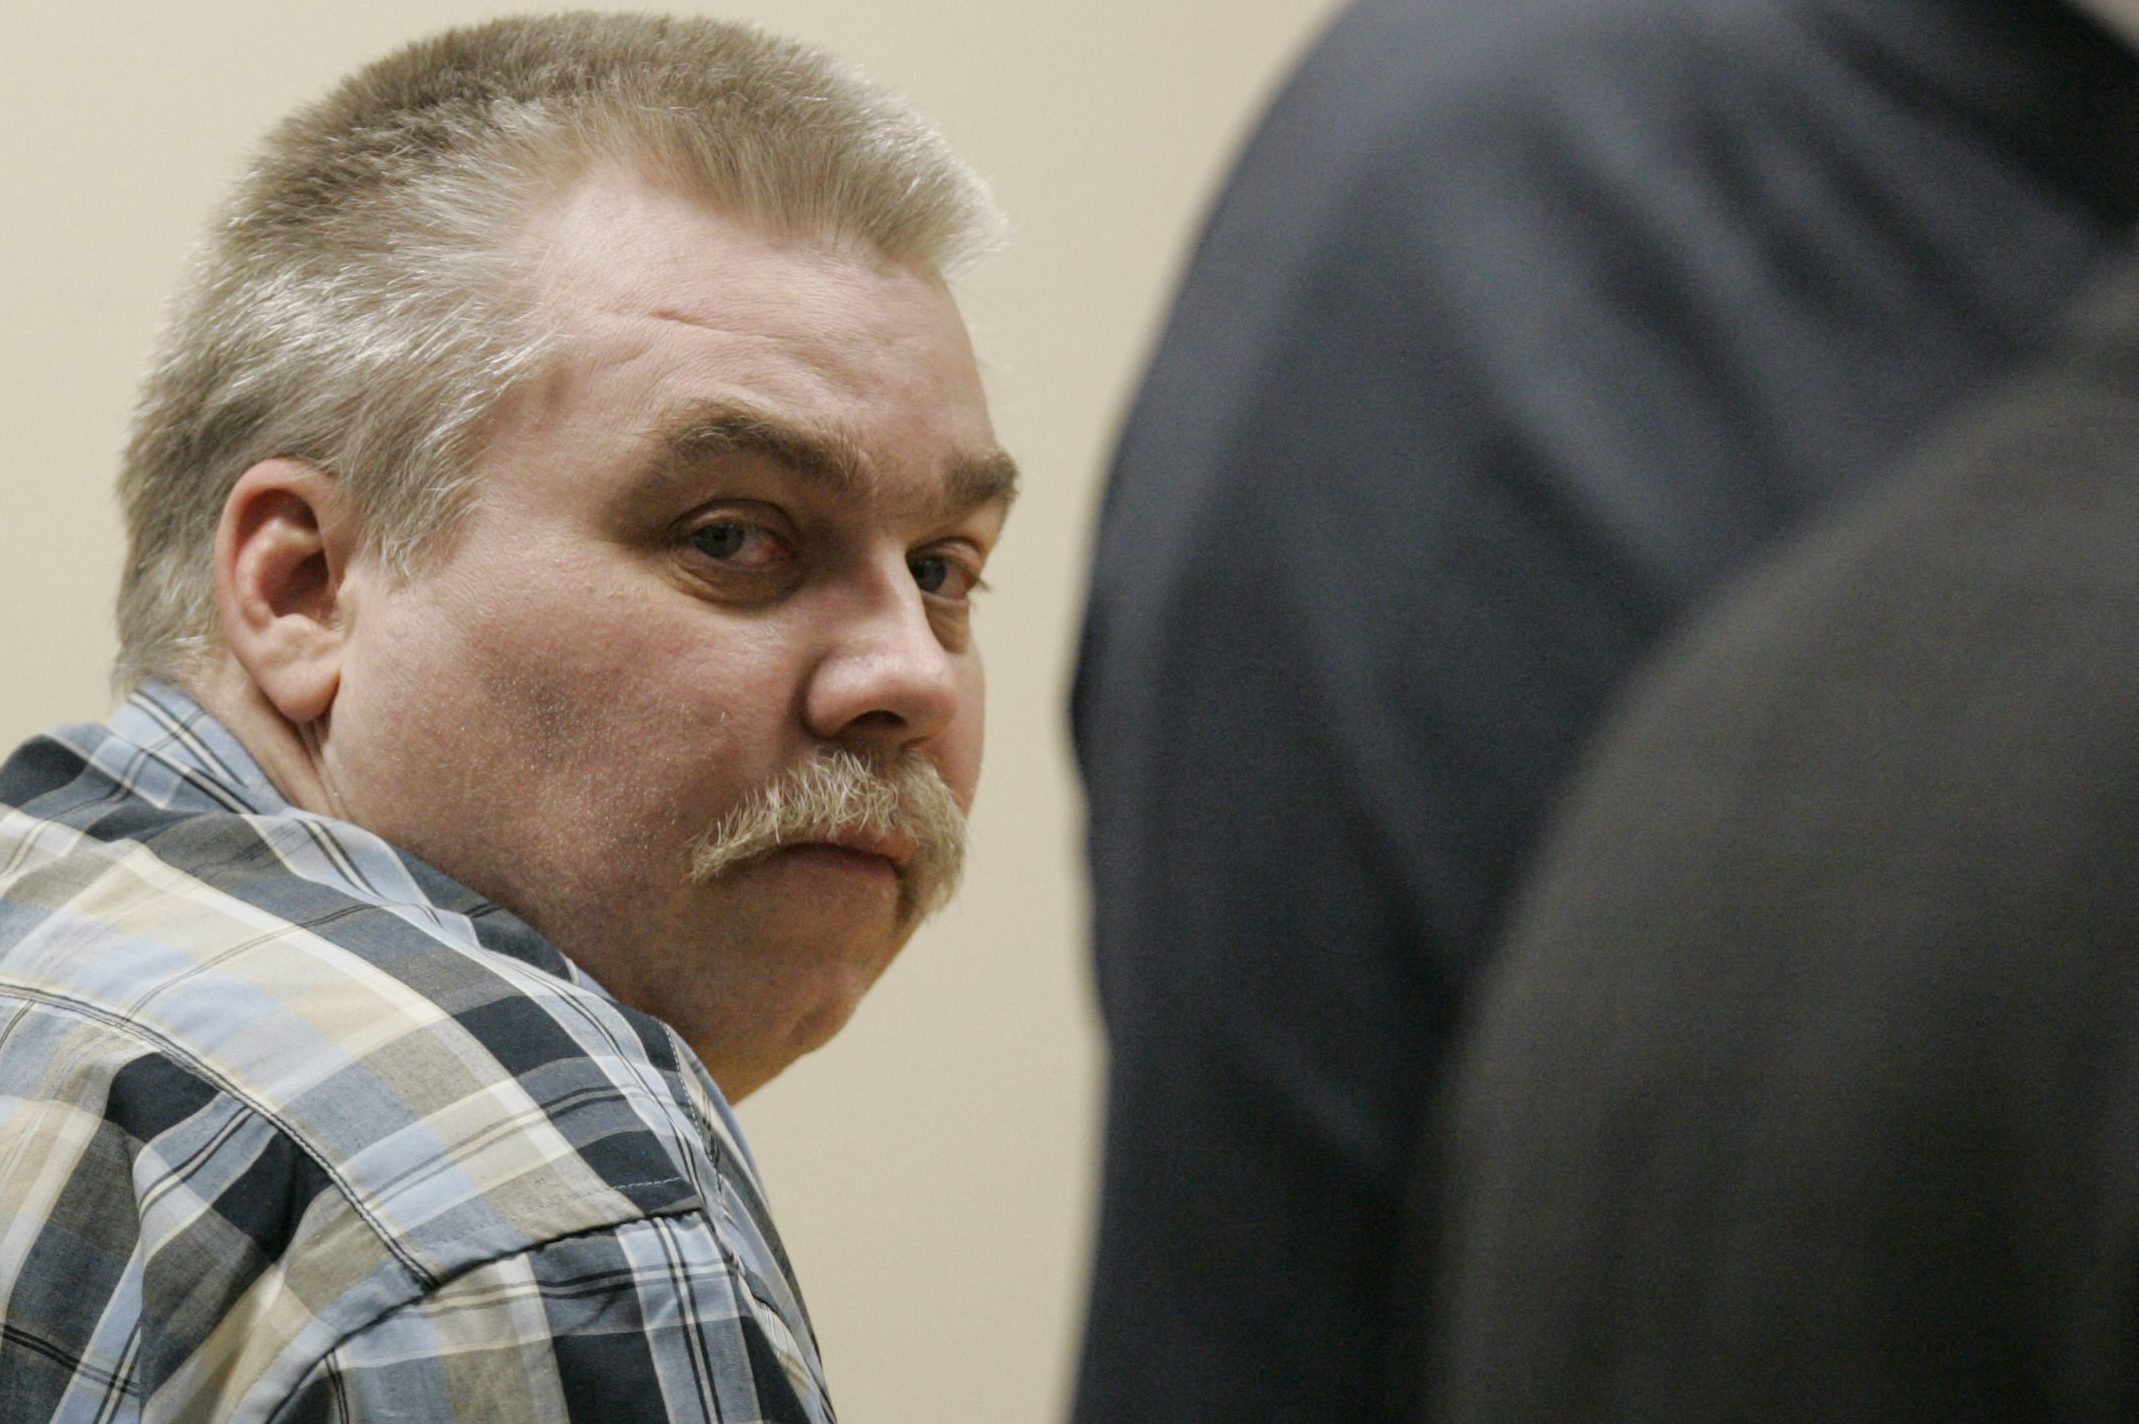 Steven Avery Bragged About Money Before His Murder Conviction